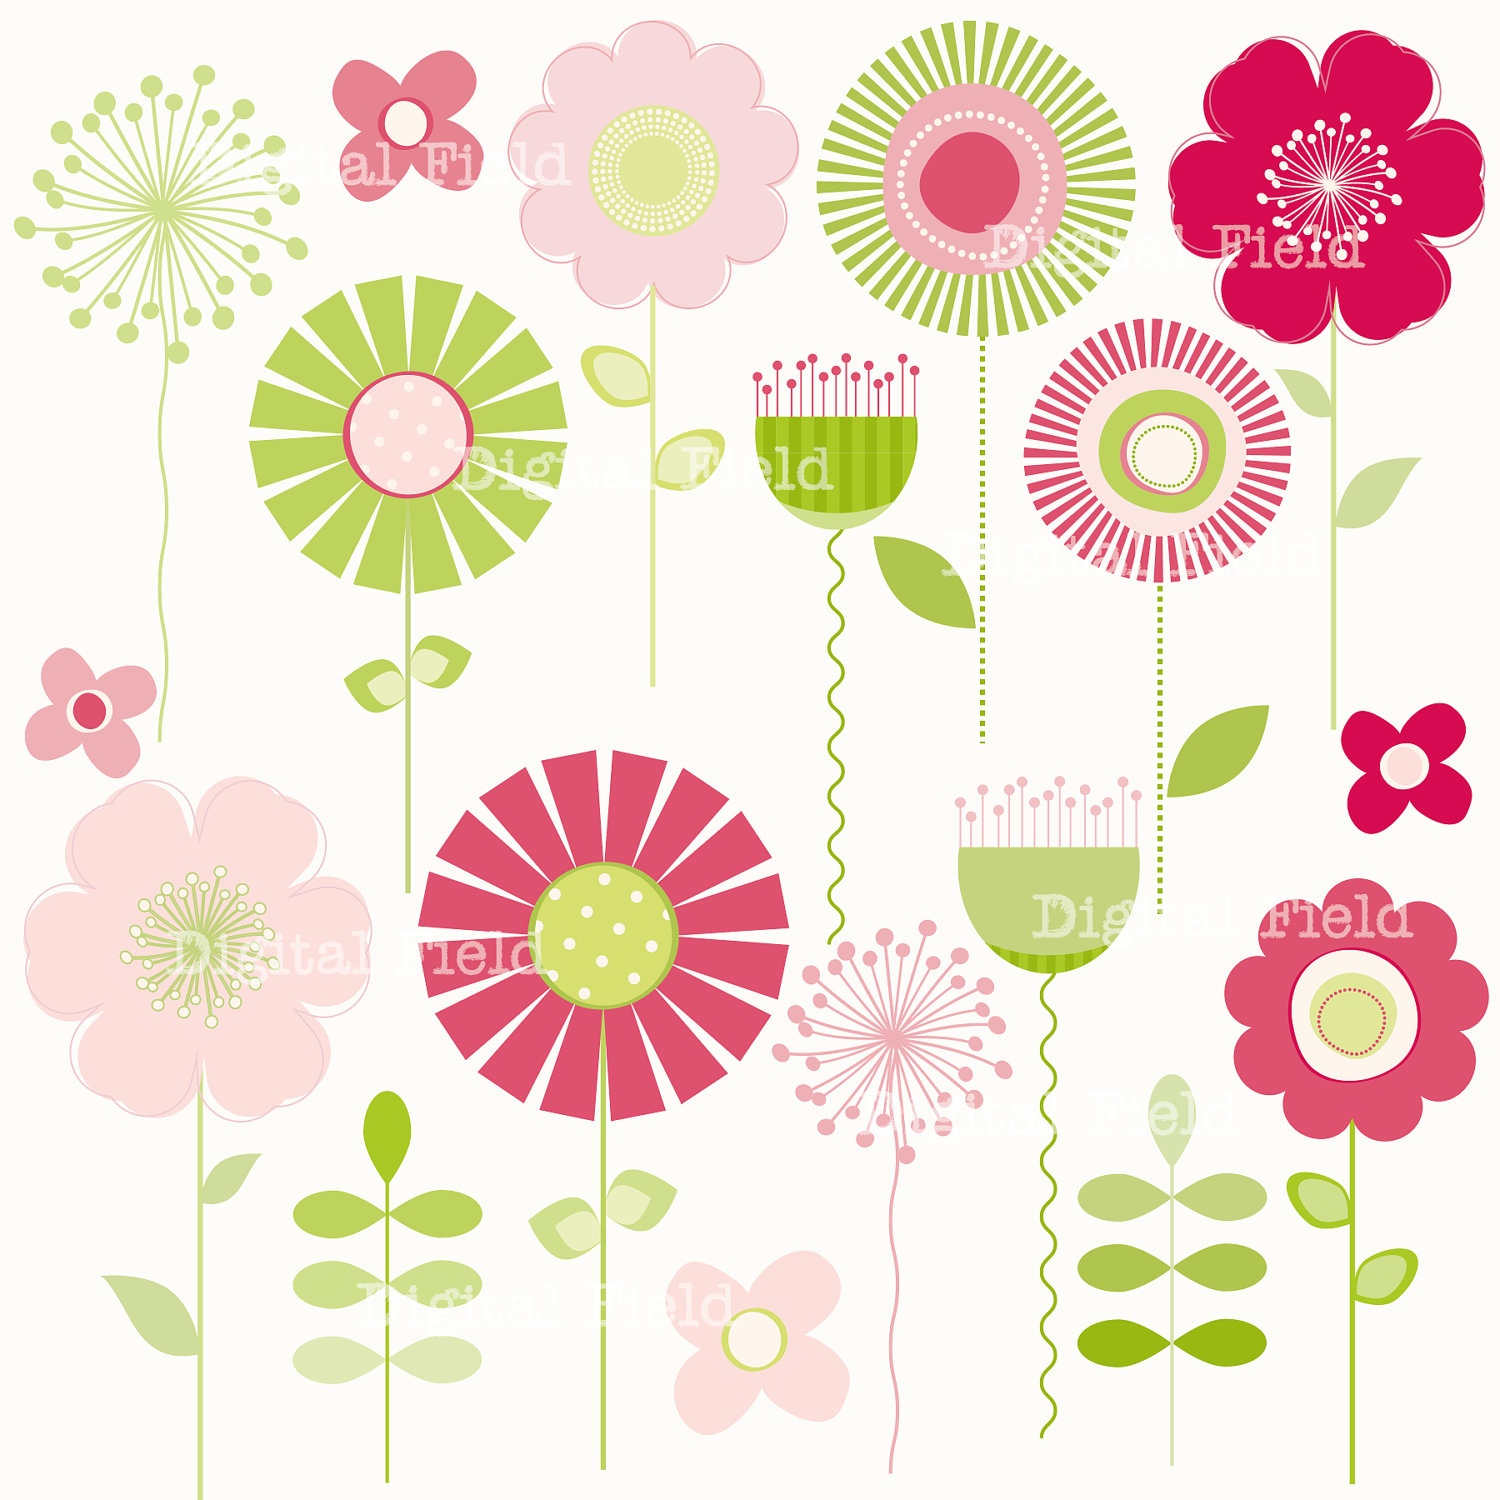 Free Printable Flower Cliparts, Download Free Clip Art, Free Clip - Free Printable Clip Art Flowers